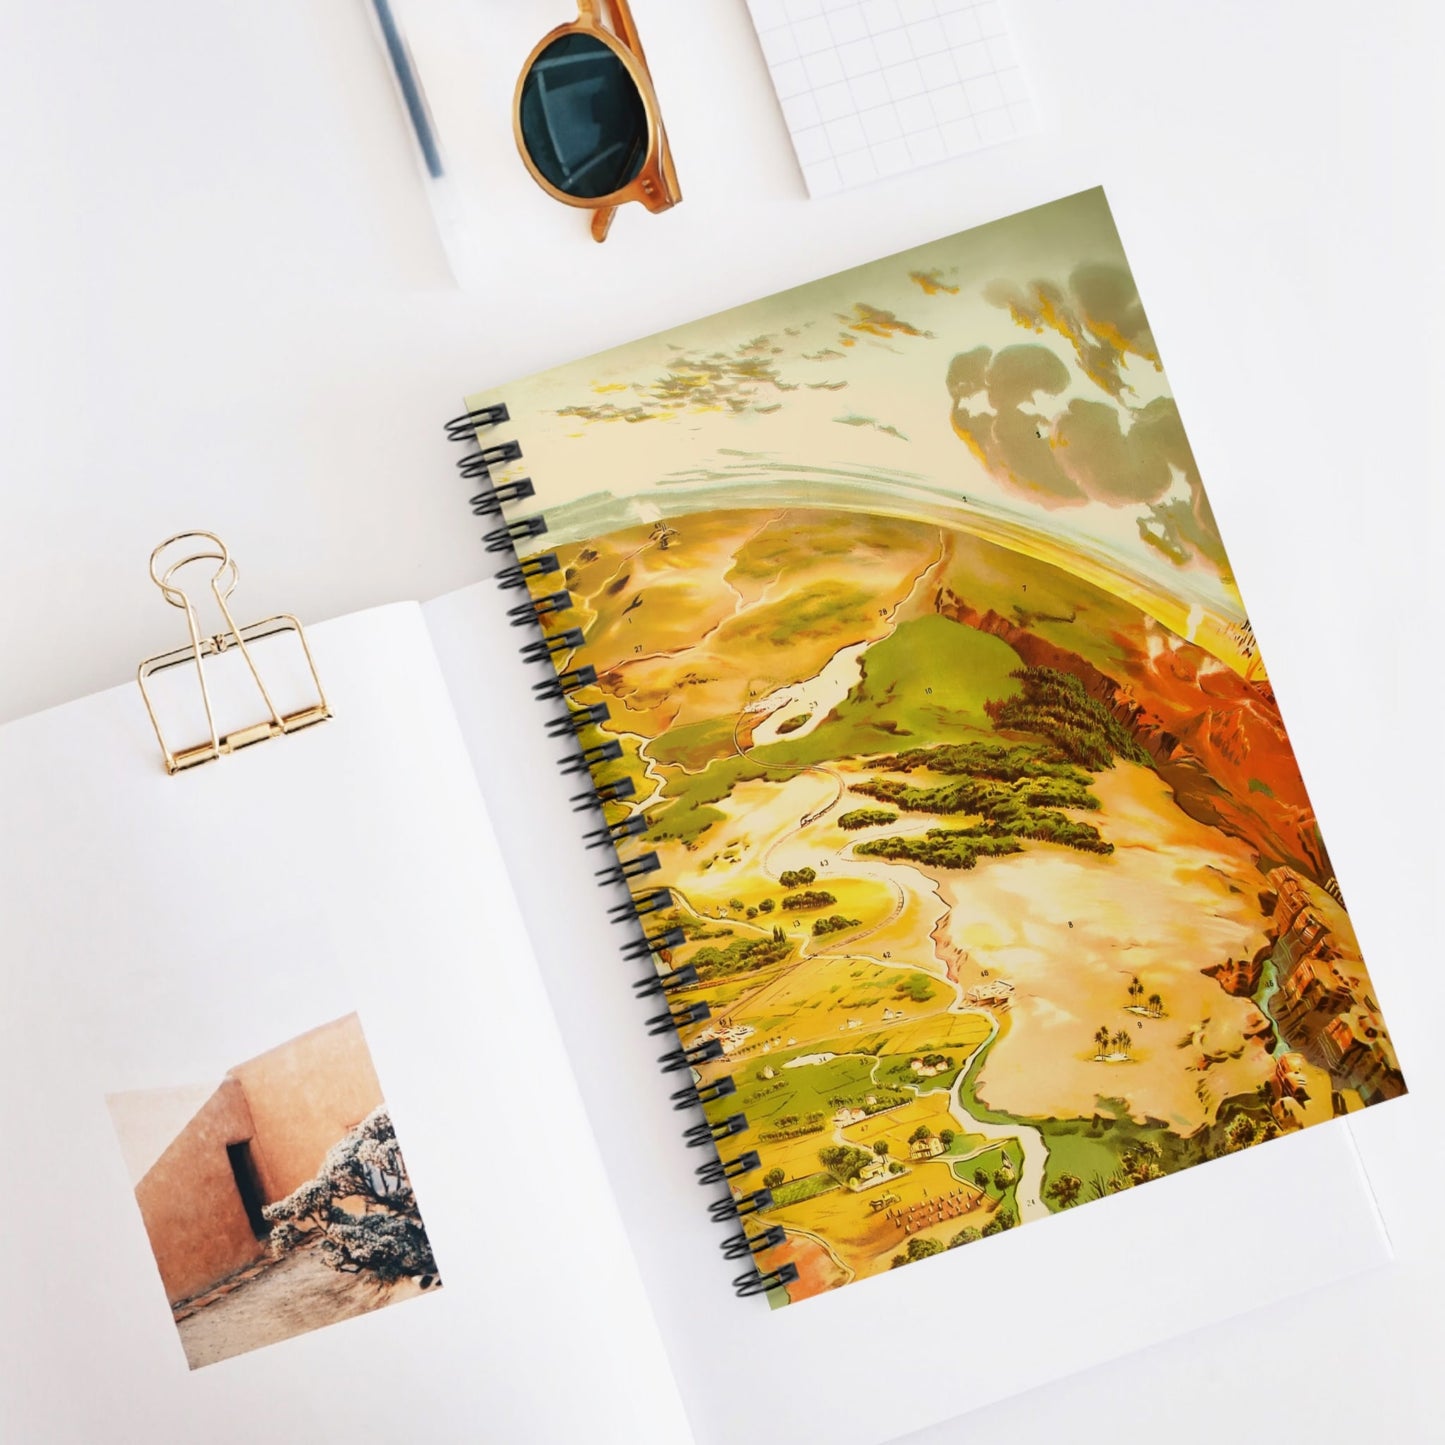 Pictorial of Earth Spiral Notebook Displayed on Desk